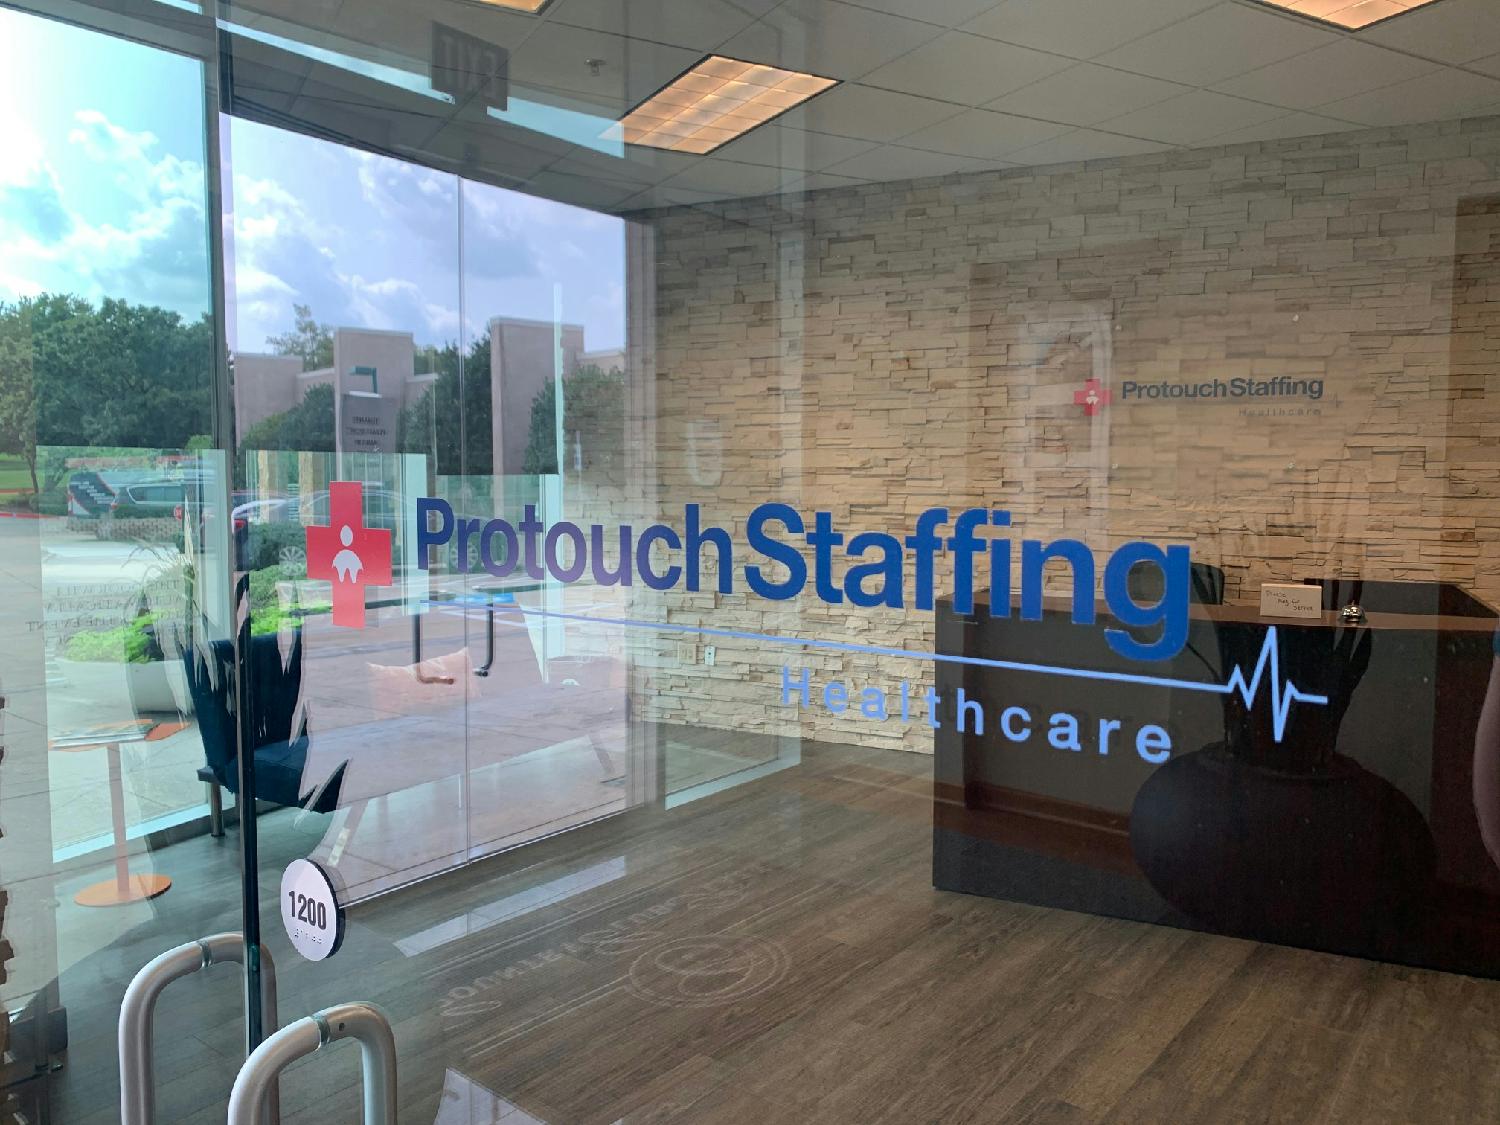 Frisco, Texas headquarters of Protouch Staffing.